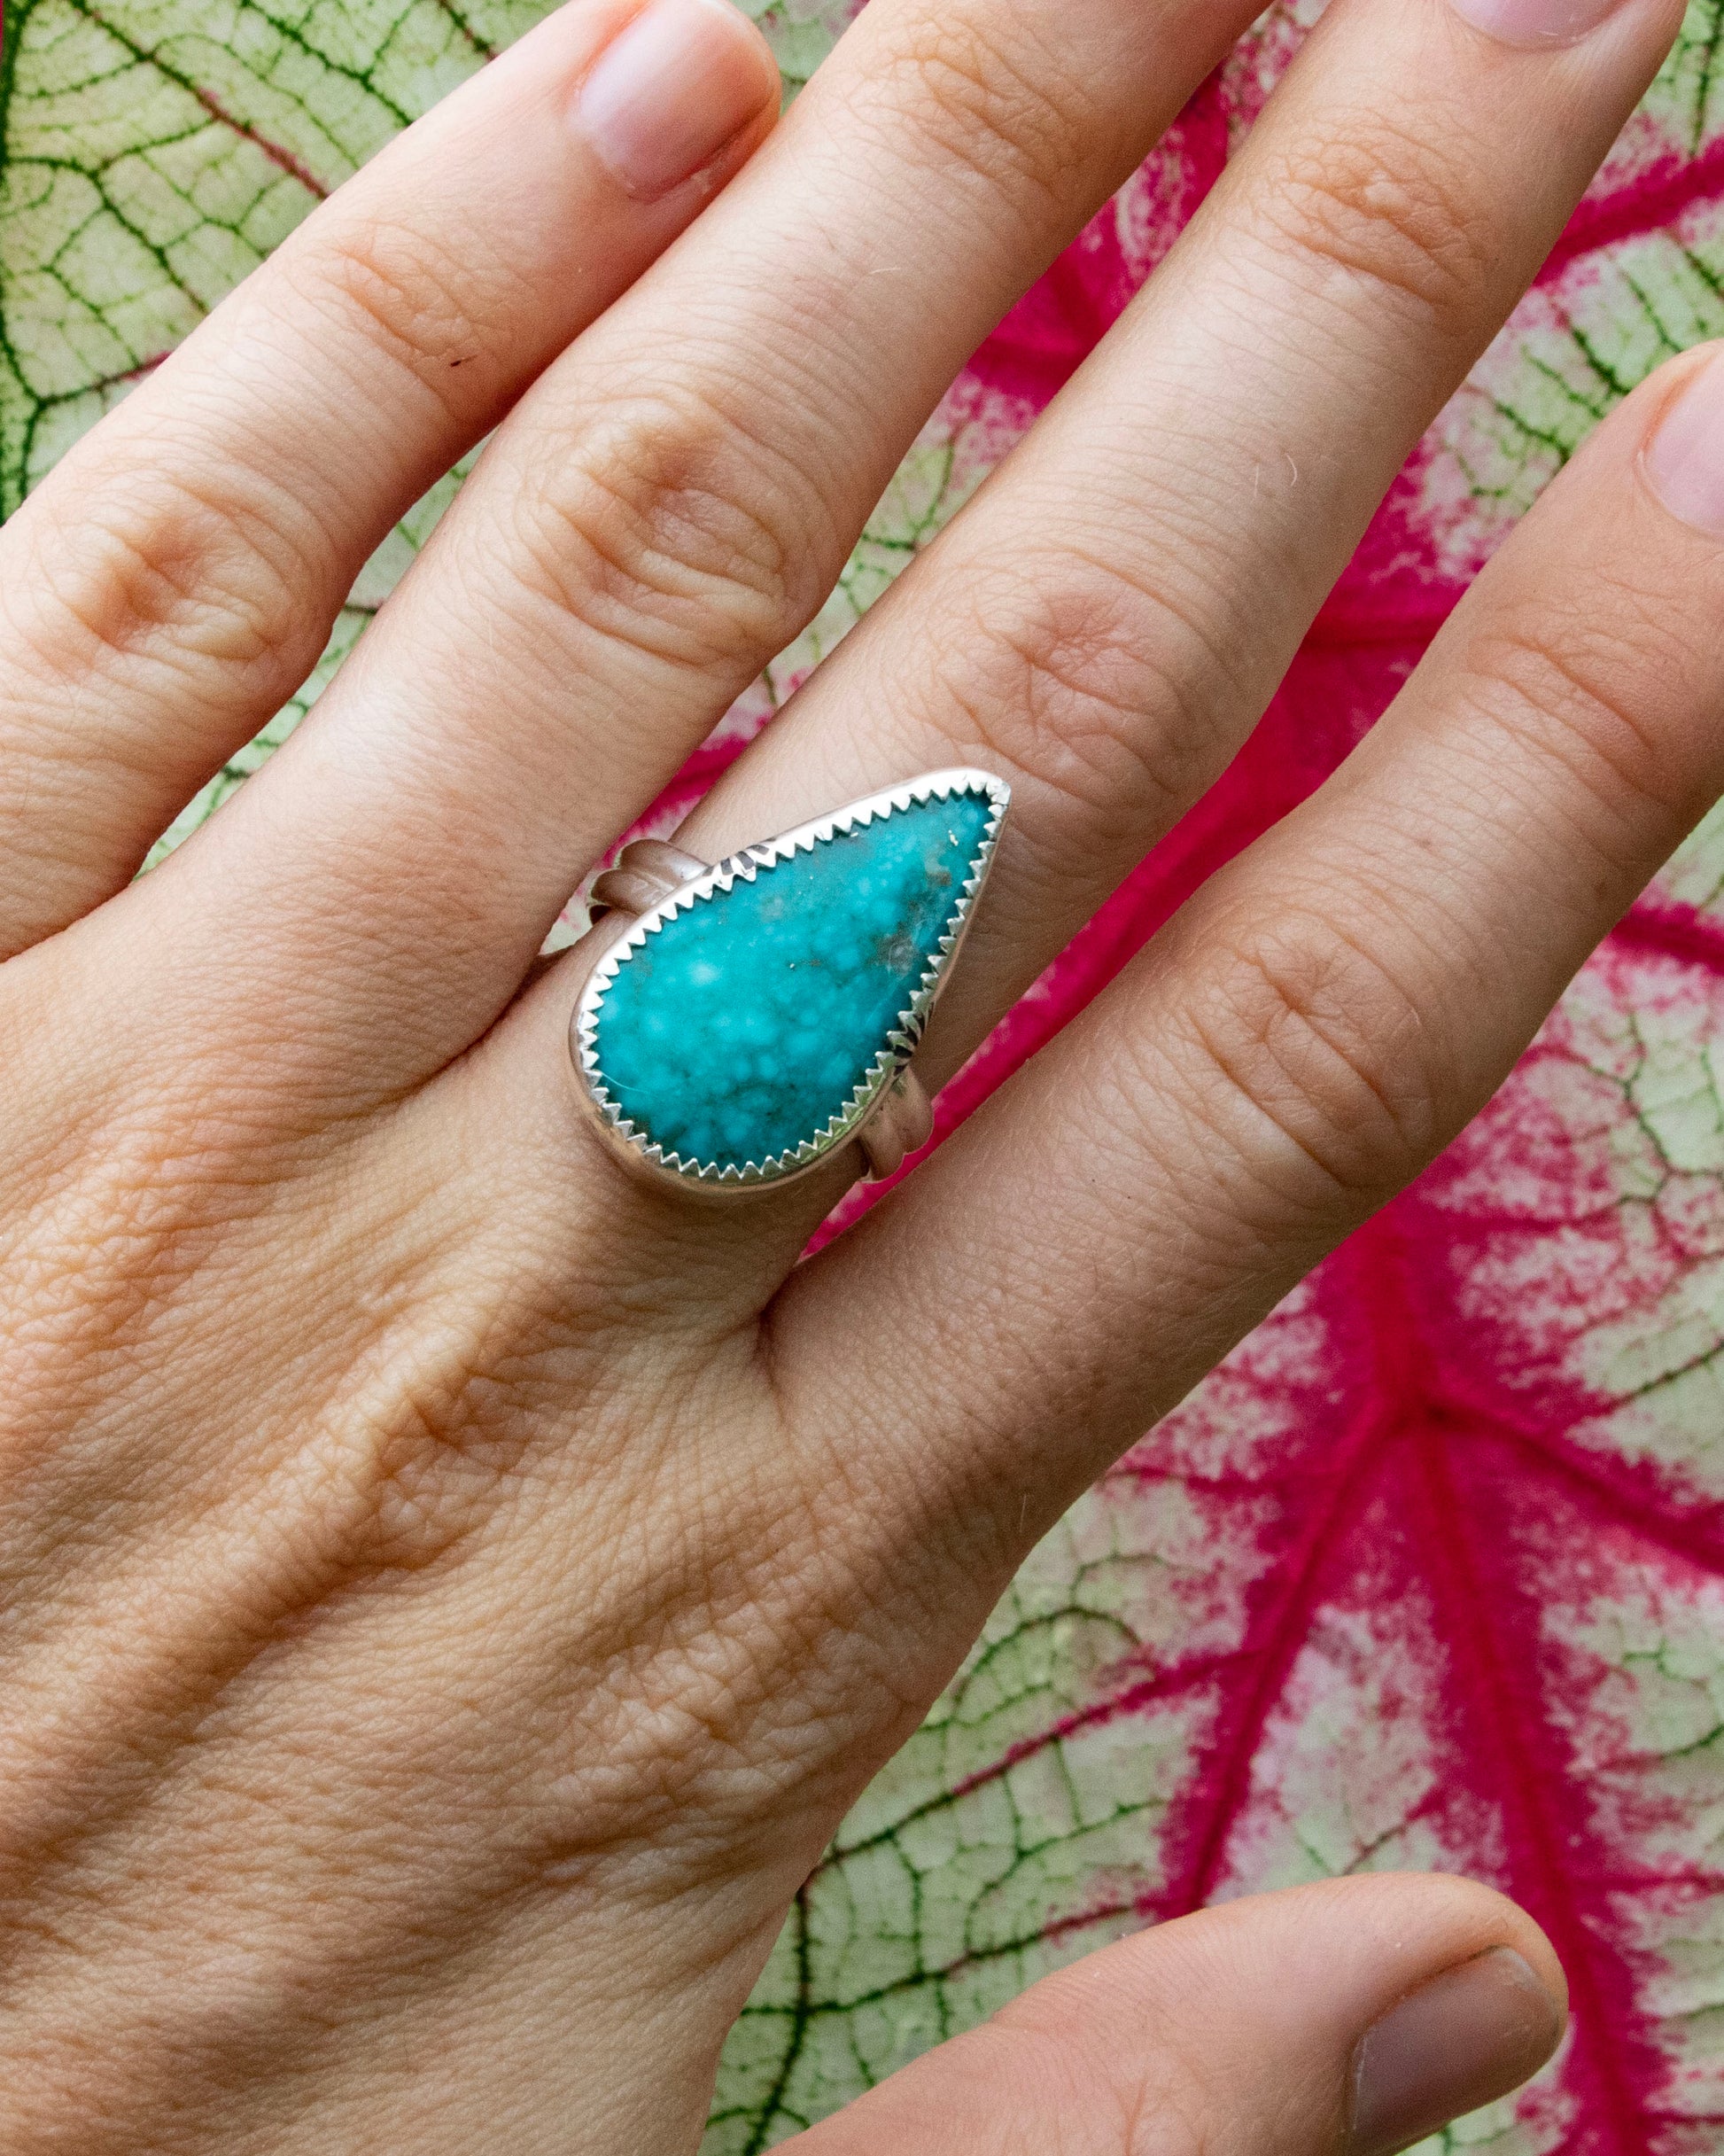 chunky teardrop kingman birdseye turquoise sterling silver ring with double half round band with sunrise stamp on side of bezel being worn on ring finger in front of red veins on a white and green leaf